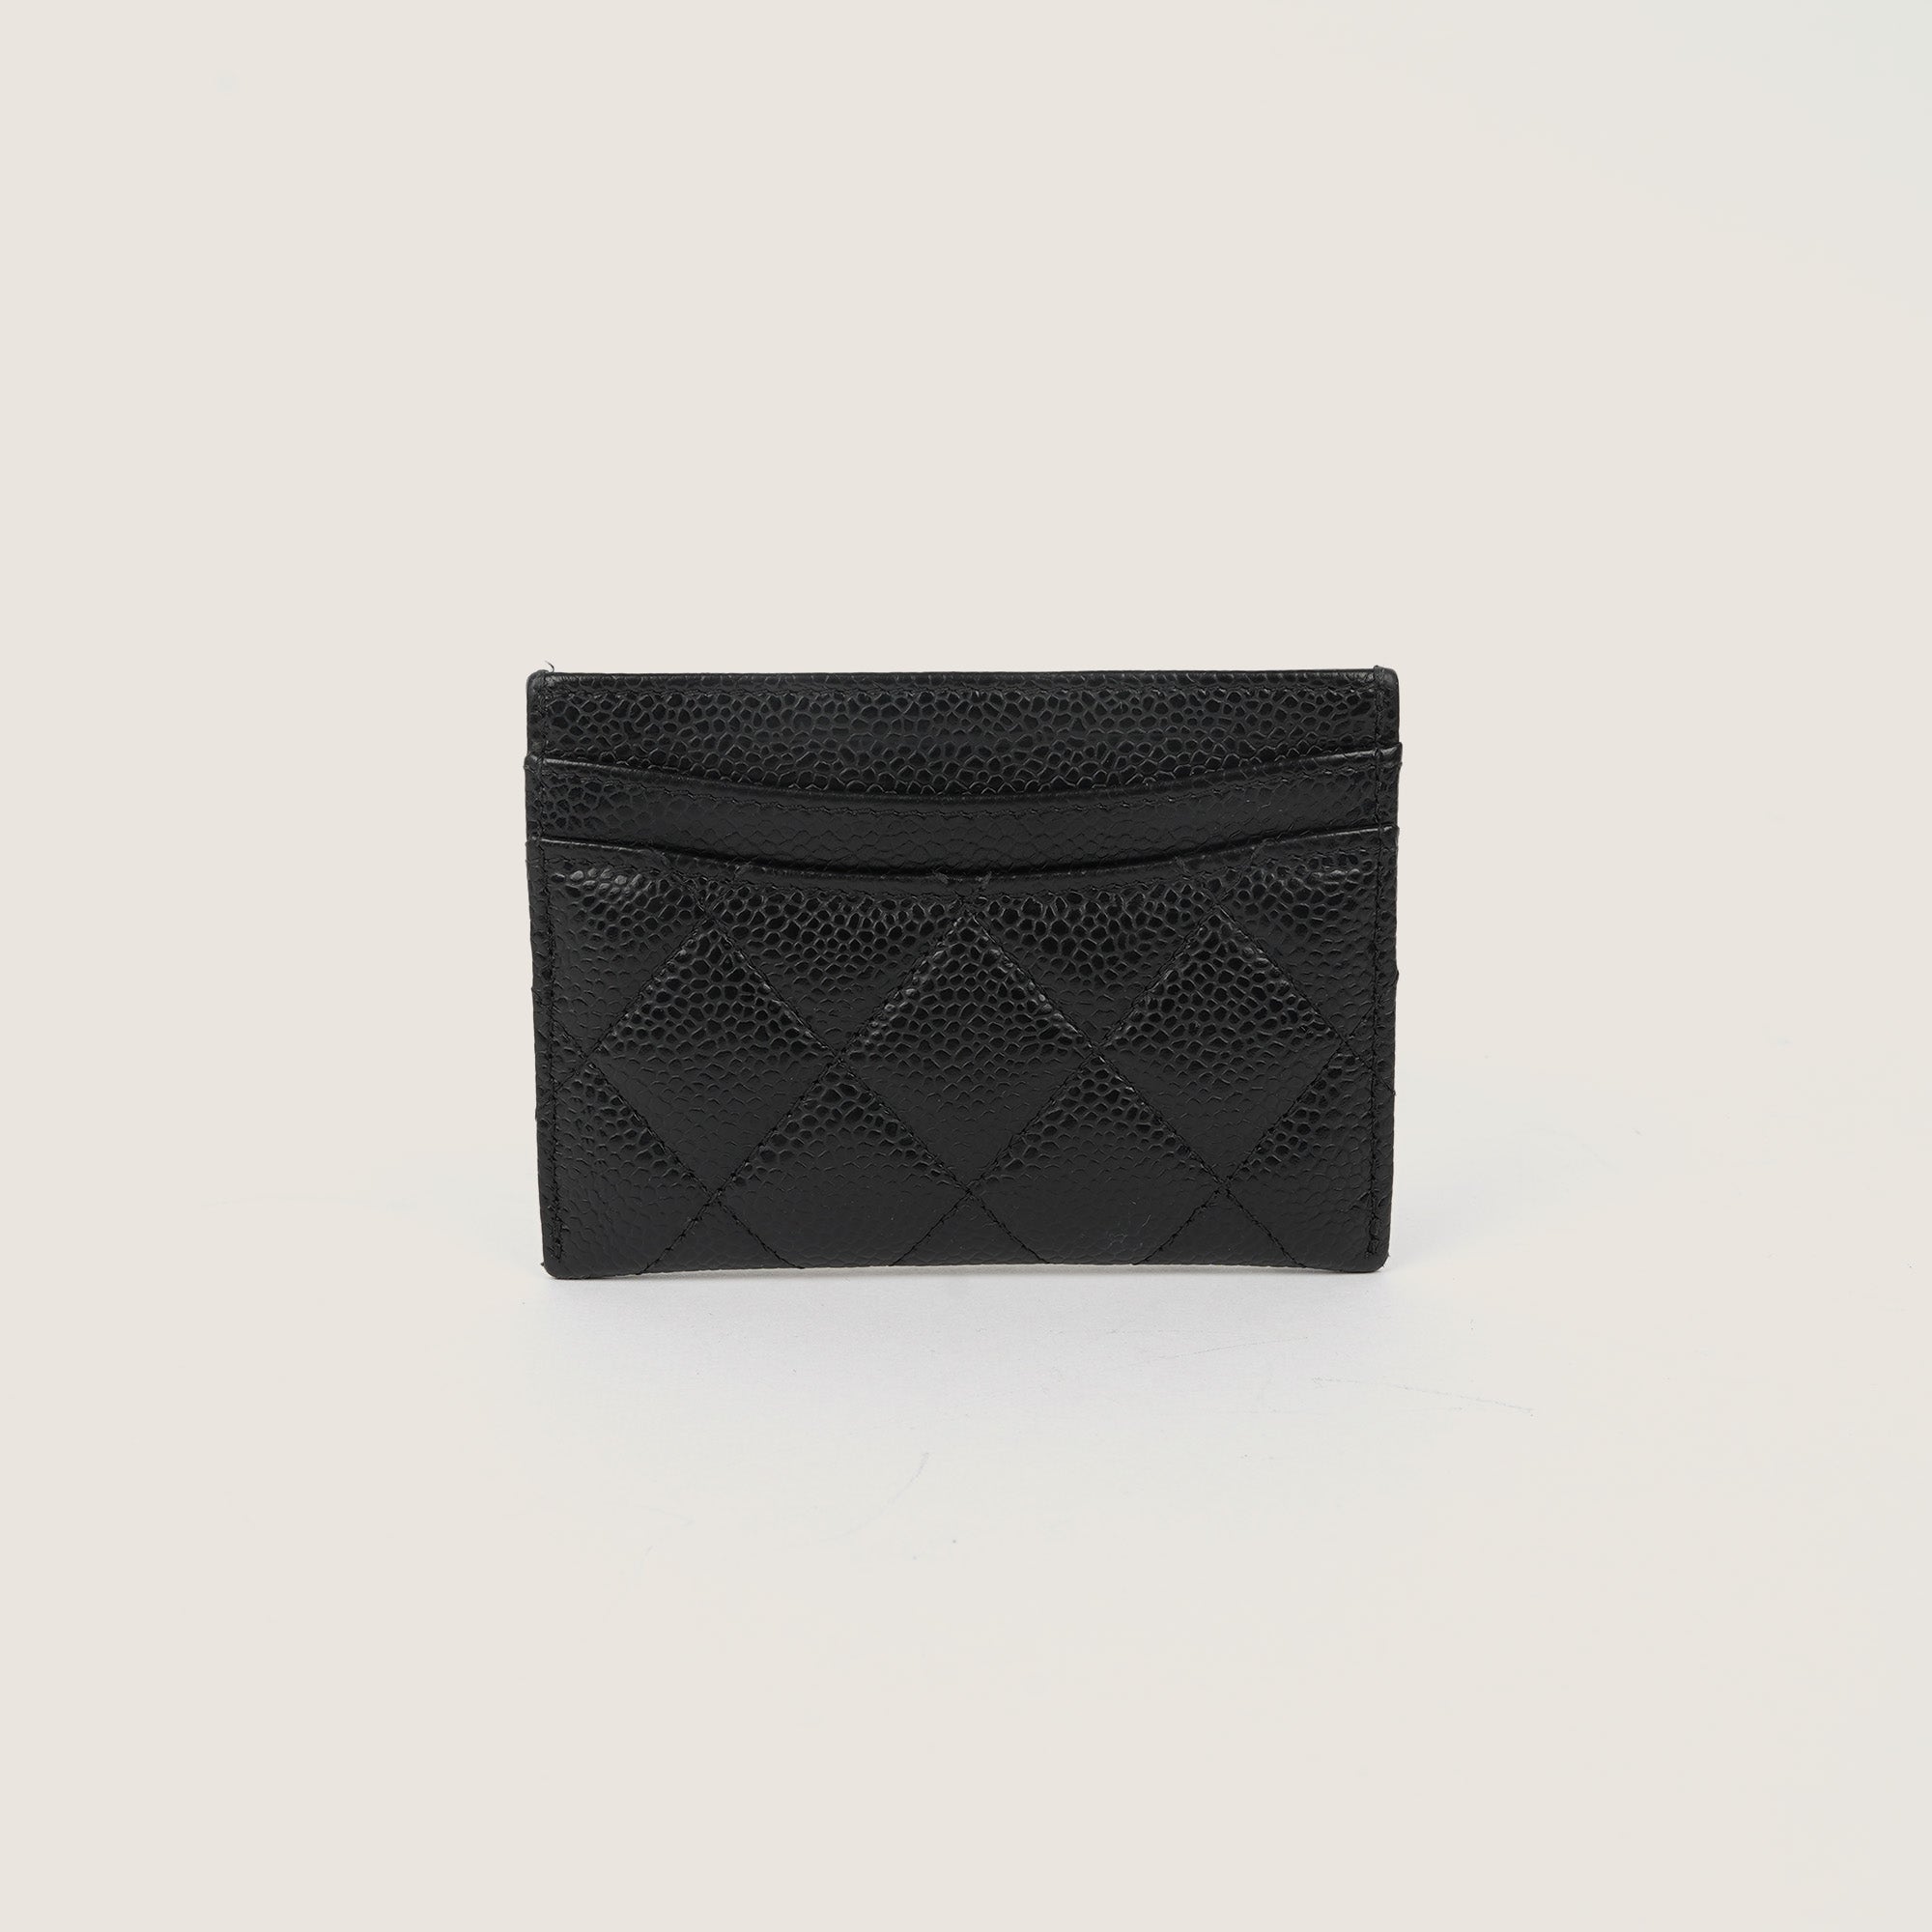 Timeless CC Cardholder - CHANEL - Affordable Luxury image